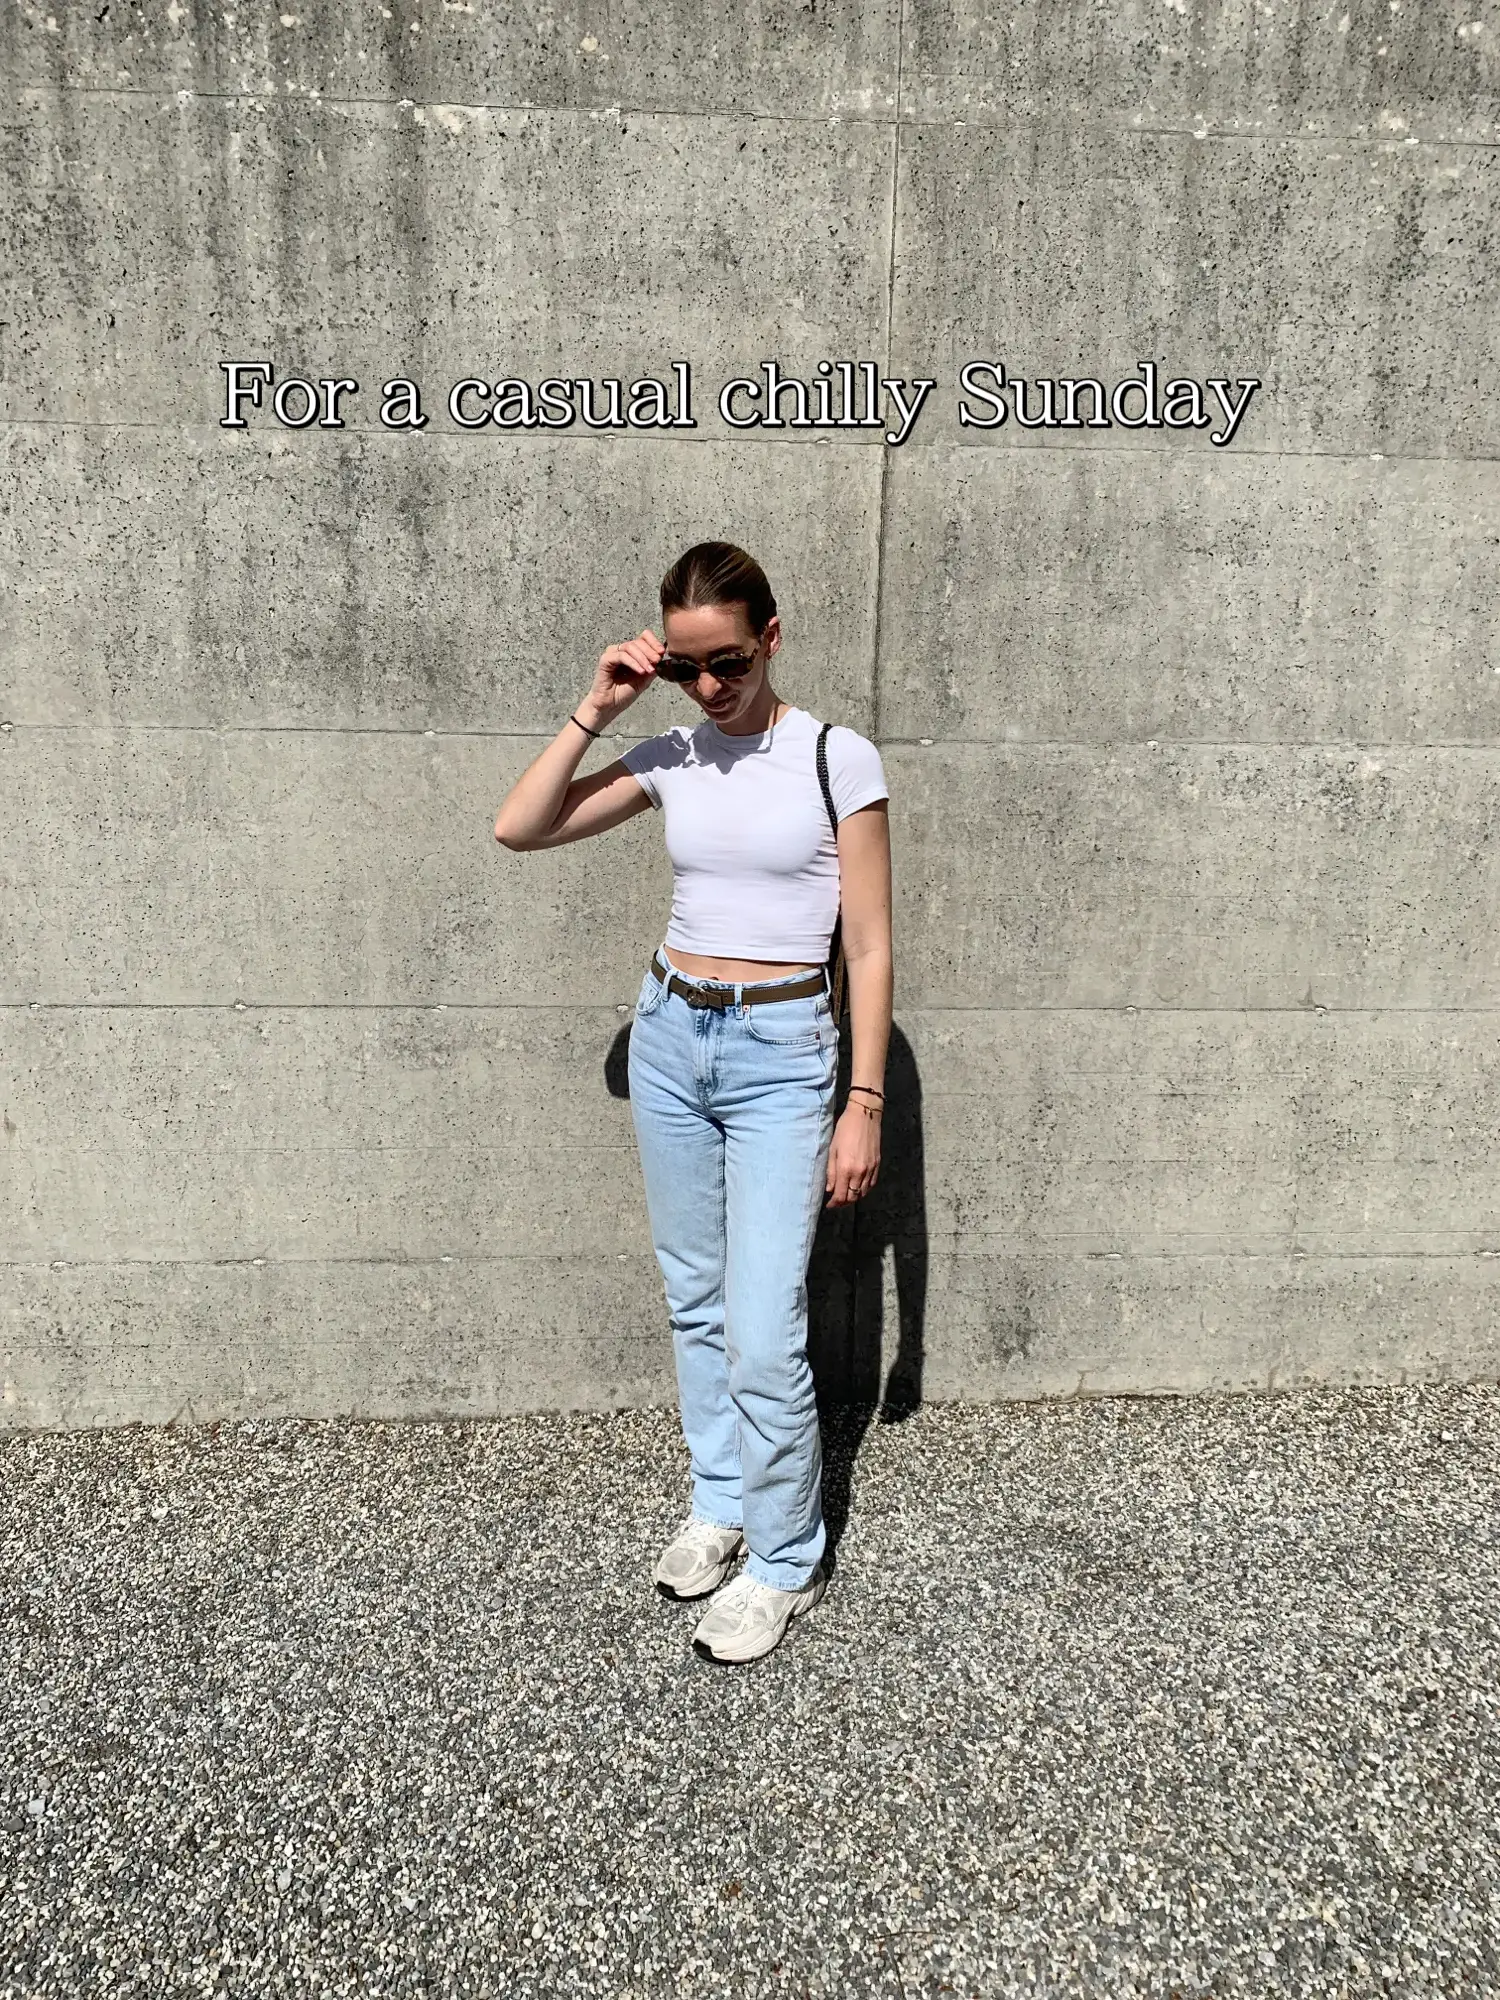 5 NEUTRAL OUTFIT IDEAS FOR SUMMER  Mom jeans outfit summer, Cute